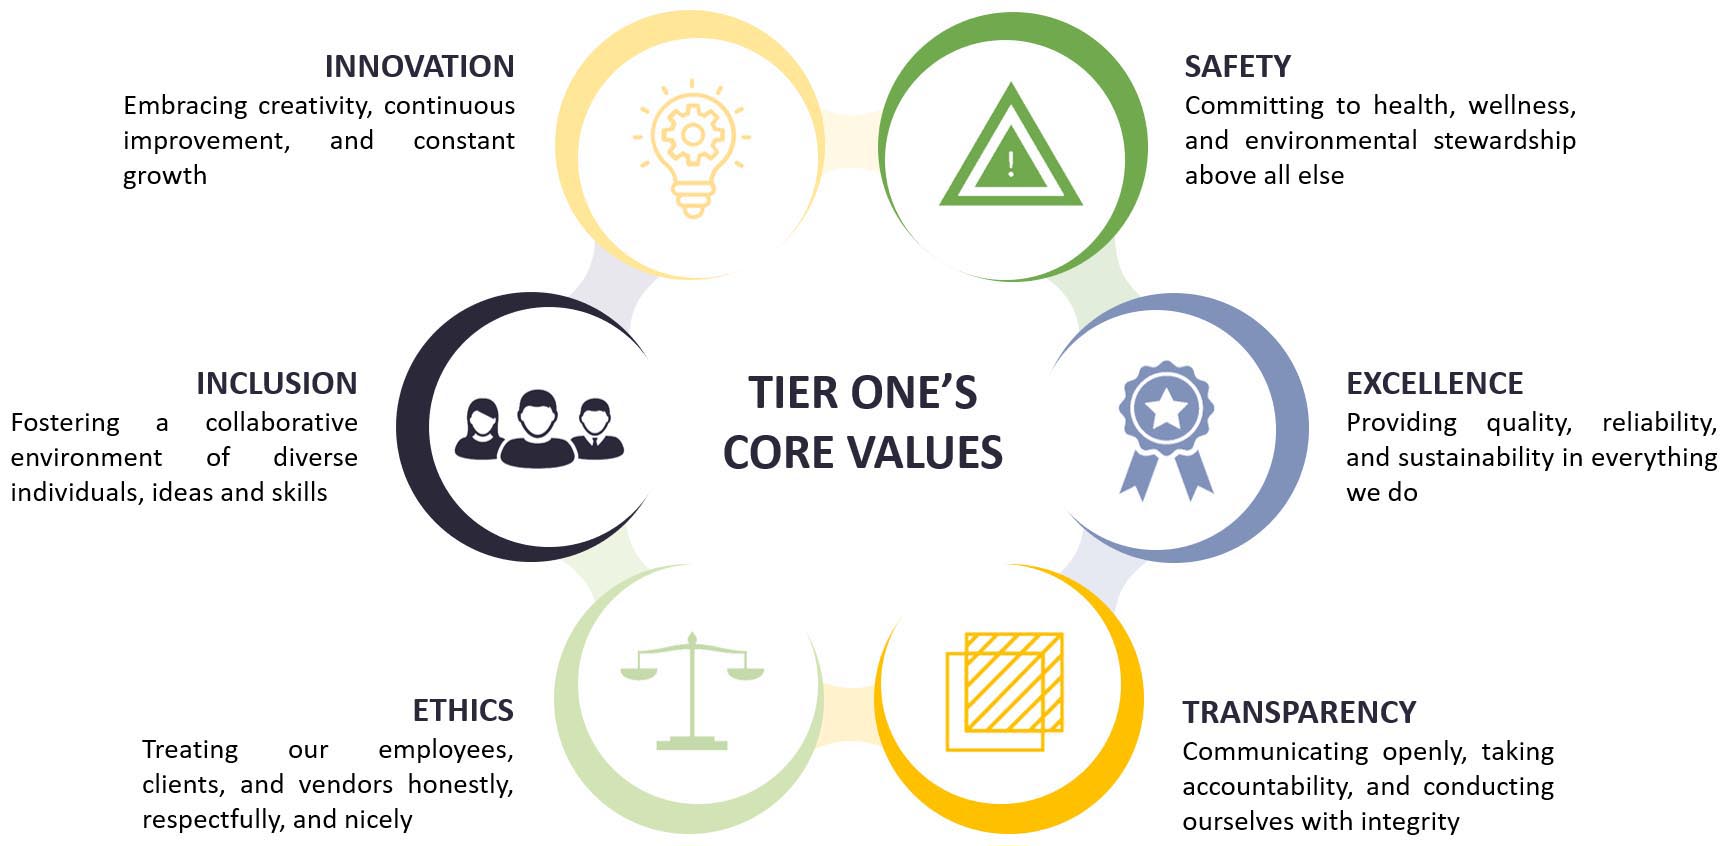 Tier One Aztec Property Services Company Core Values: Innovation, inclusion, ethics, safety, excellence, and transparency.